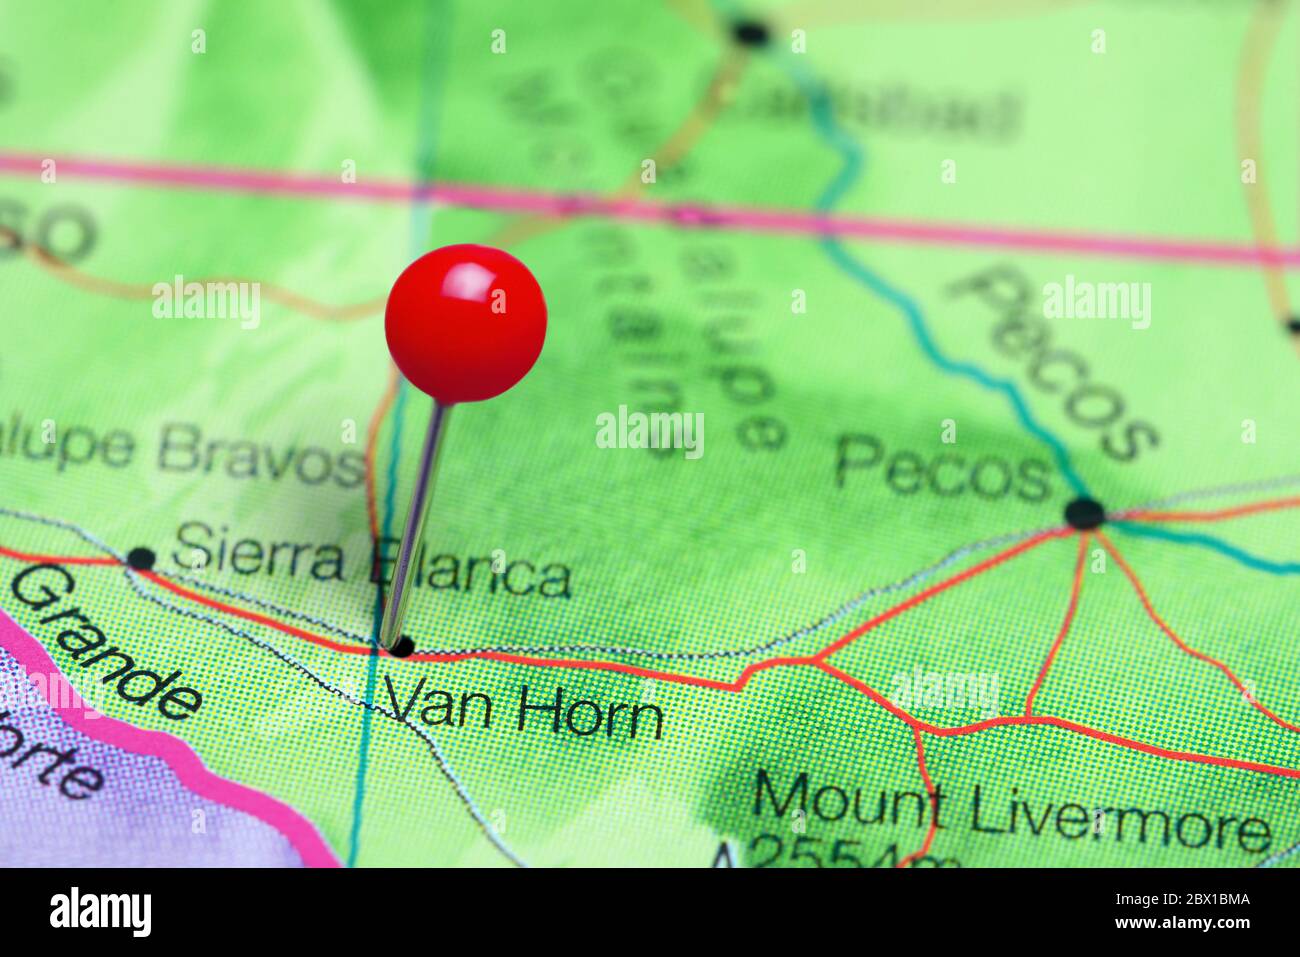 Van Horn pinned on a map of Texas, USA Stock Photo